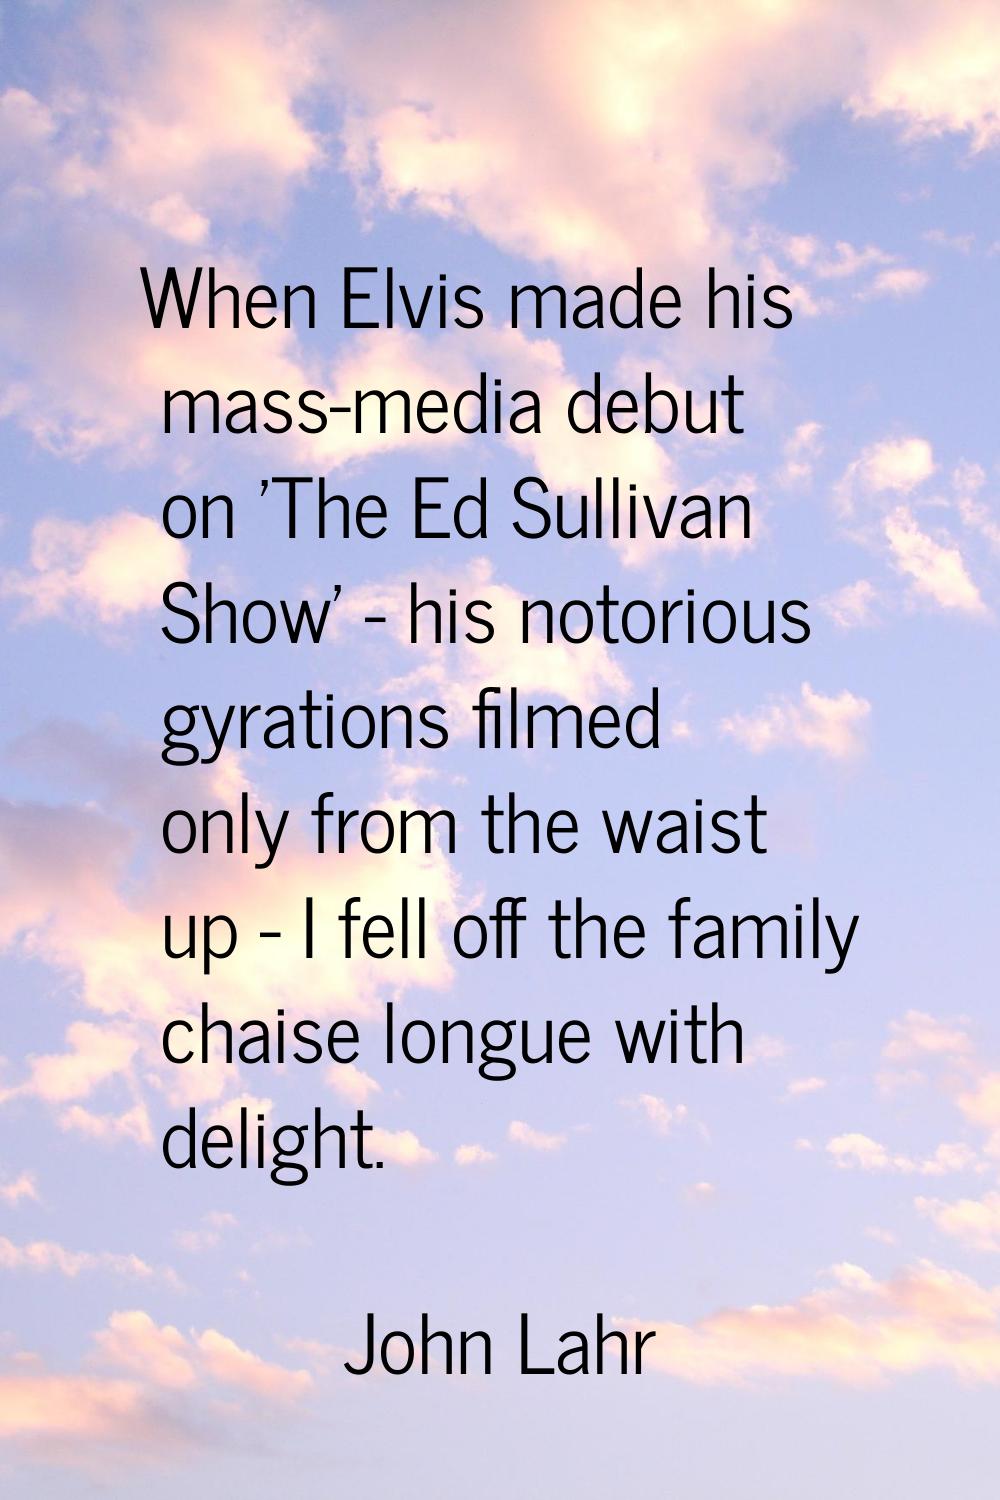 When Elvis made his mass-media debut on 'The Ed Sullivan Show' - his notorious gyrations filmed onl